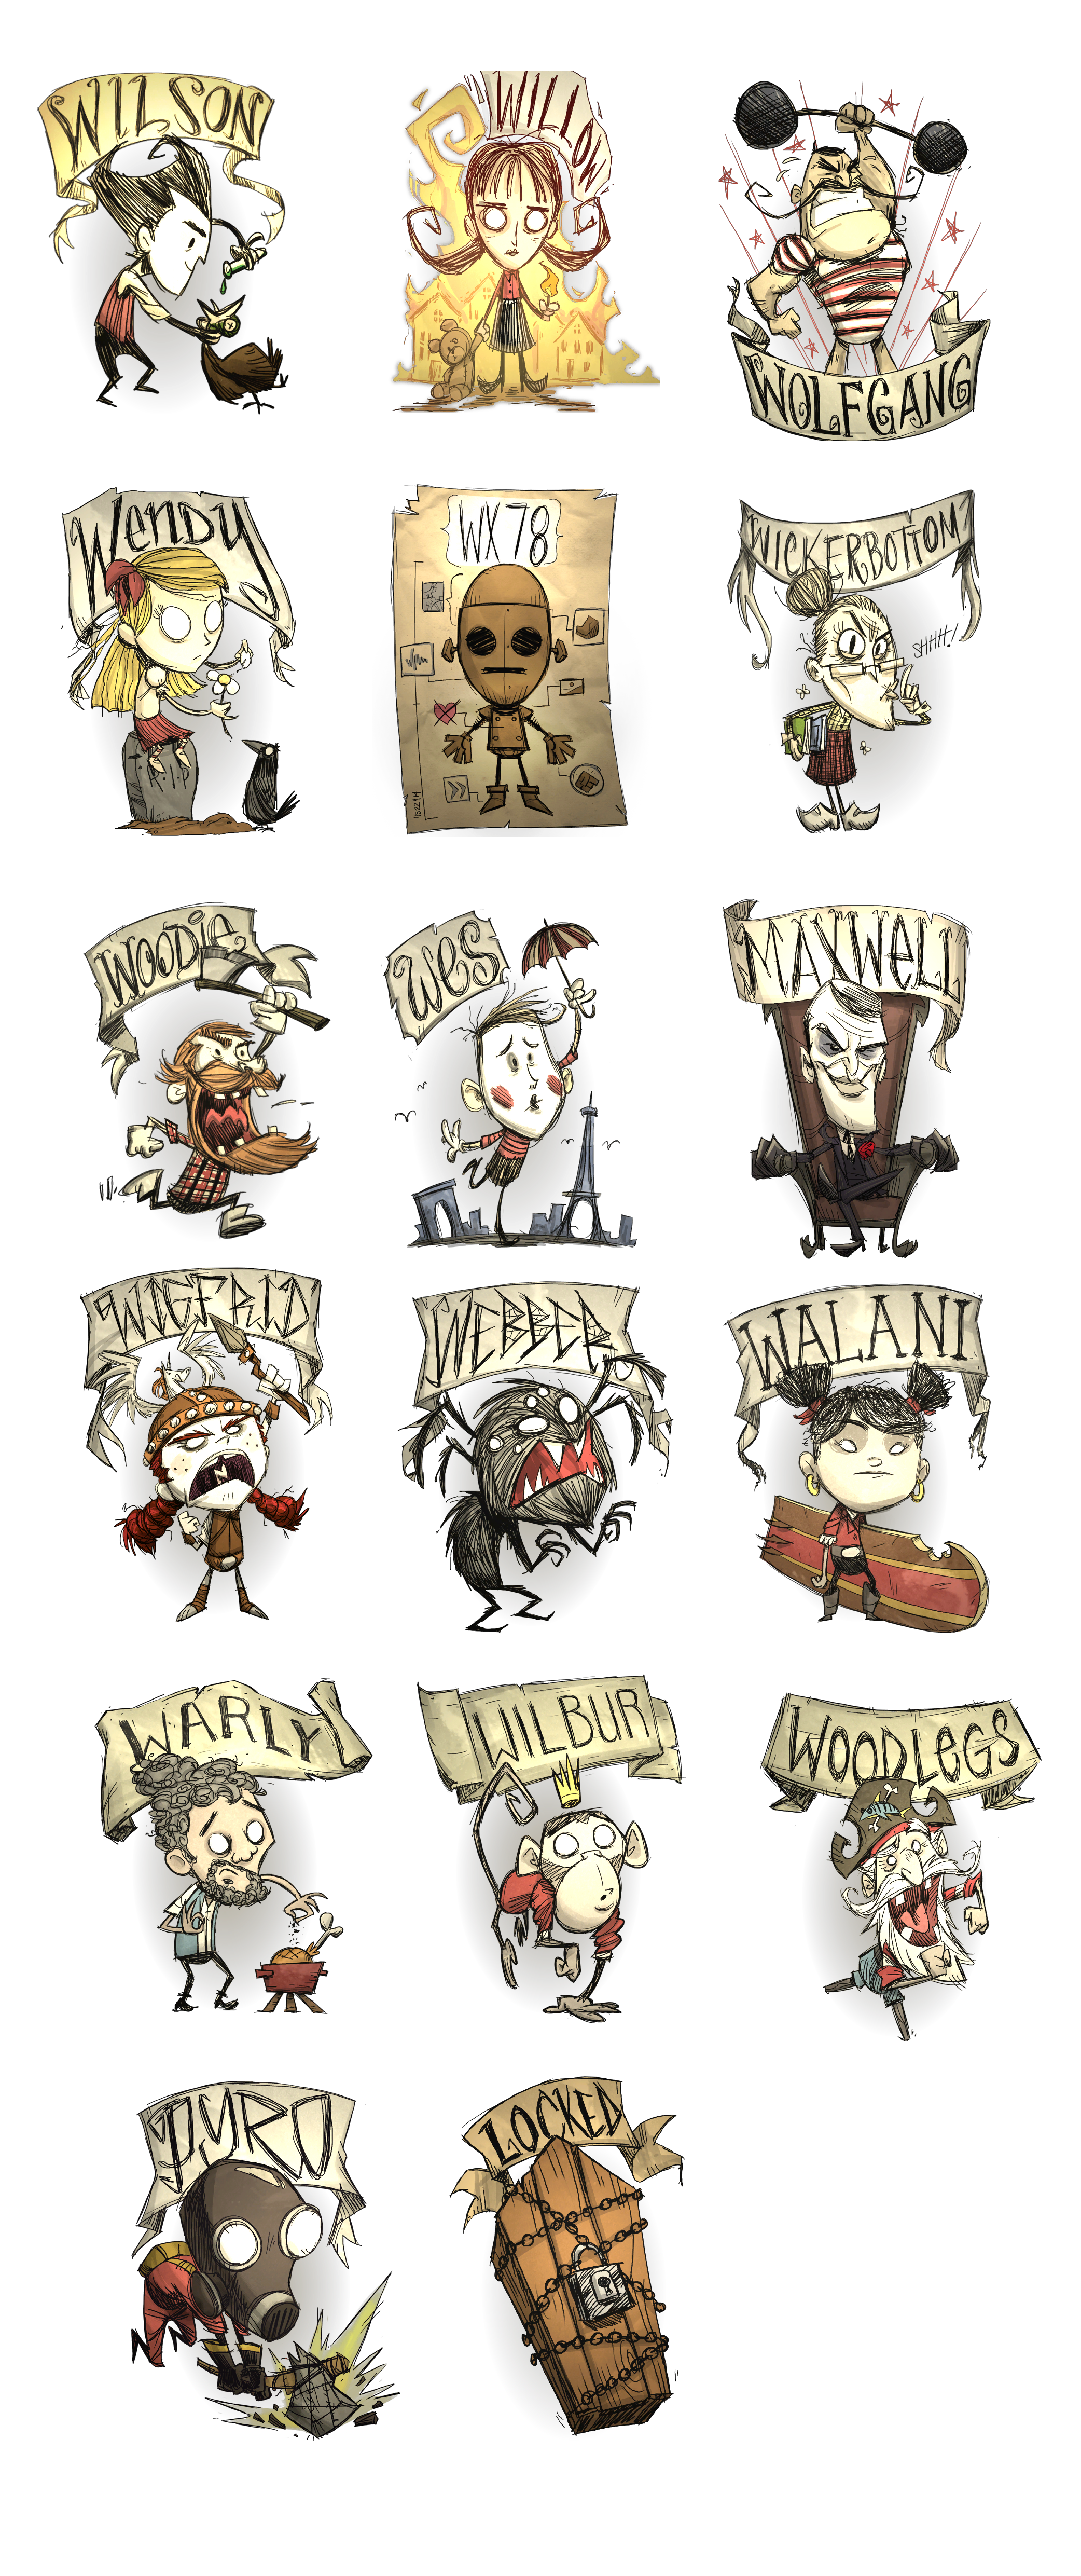 dont starve together character picking up things